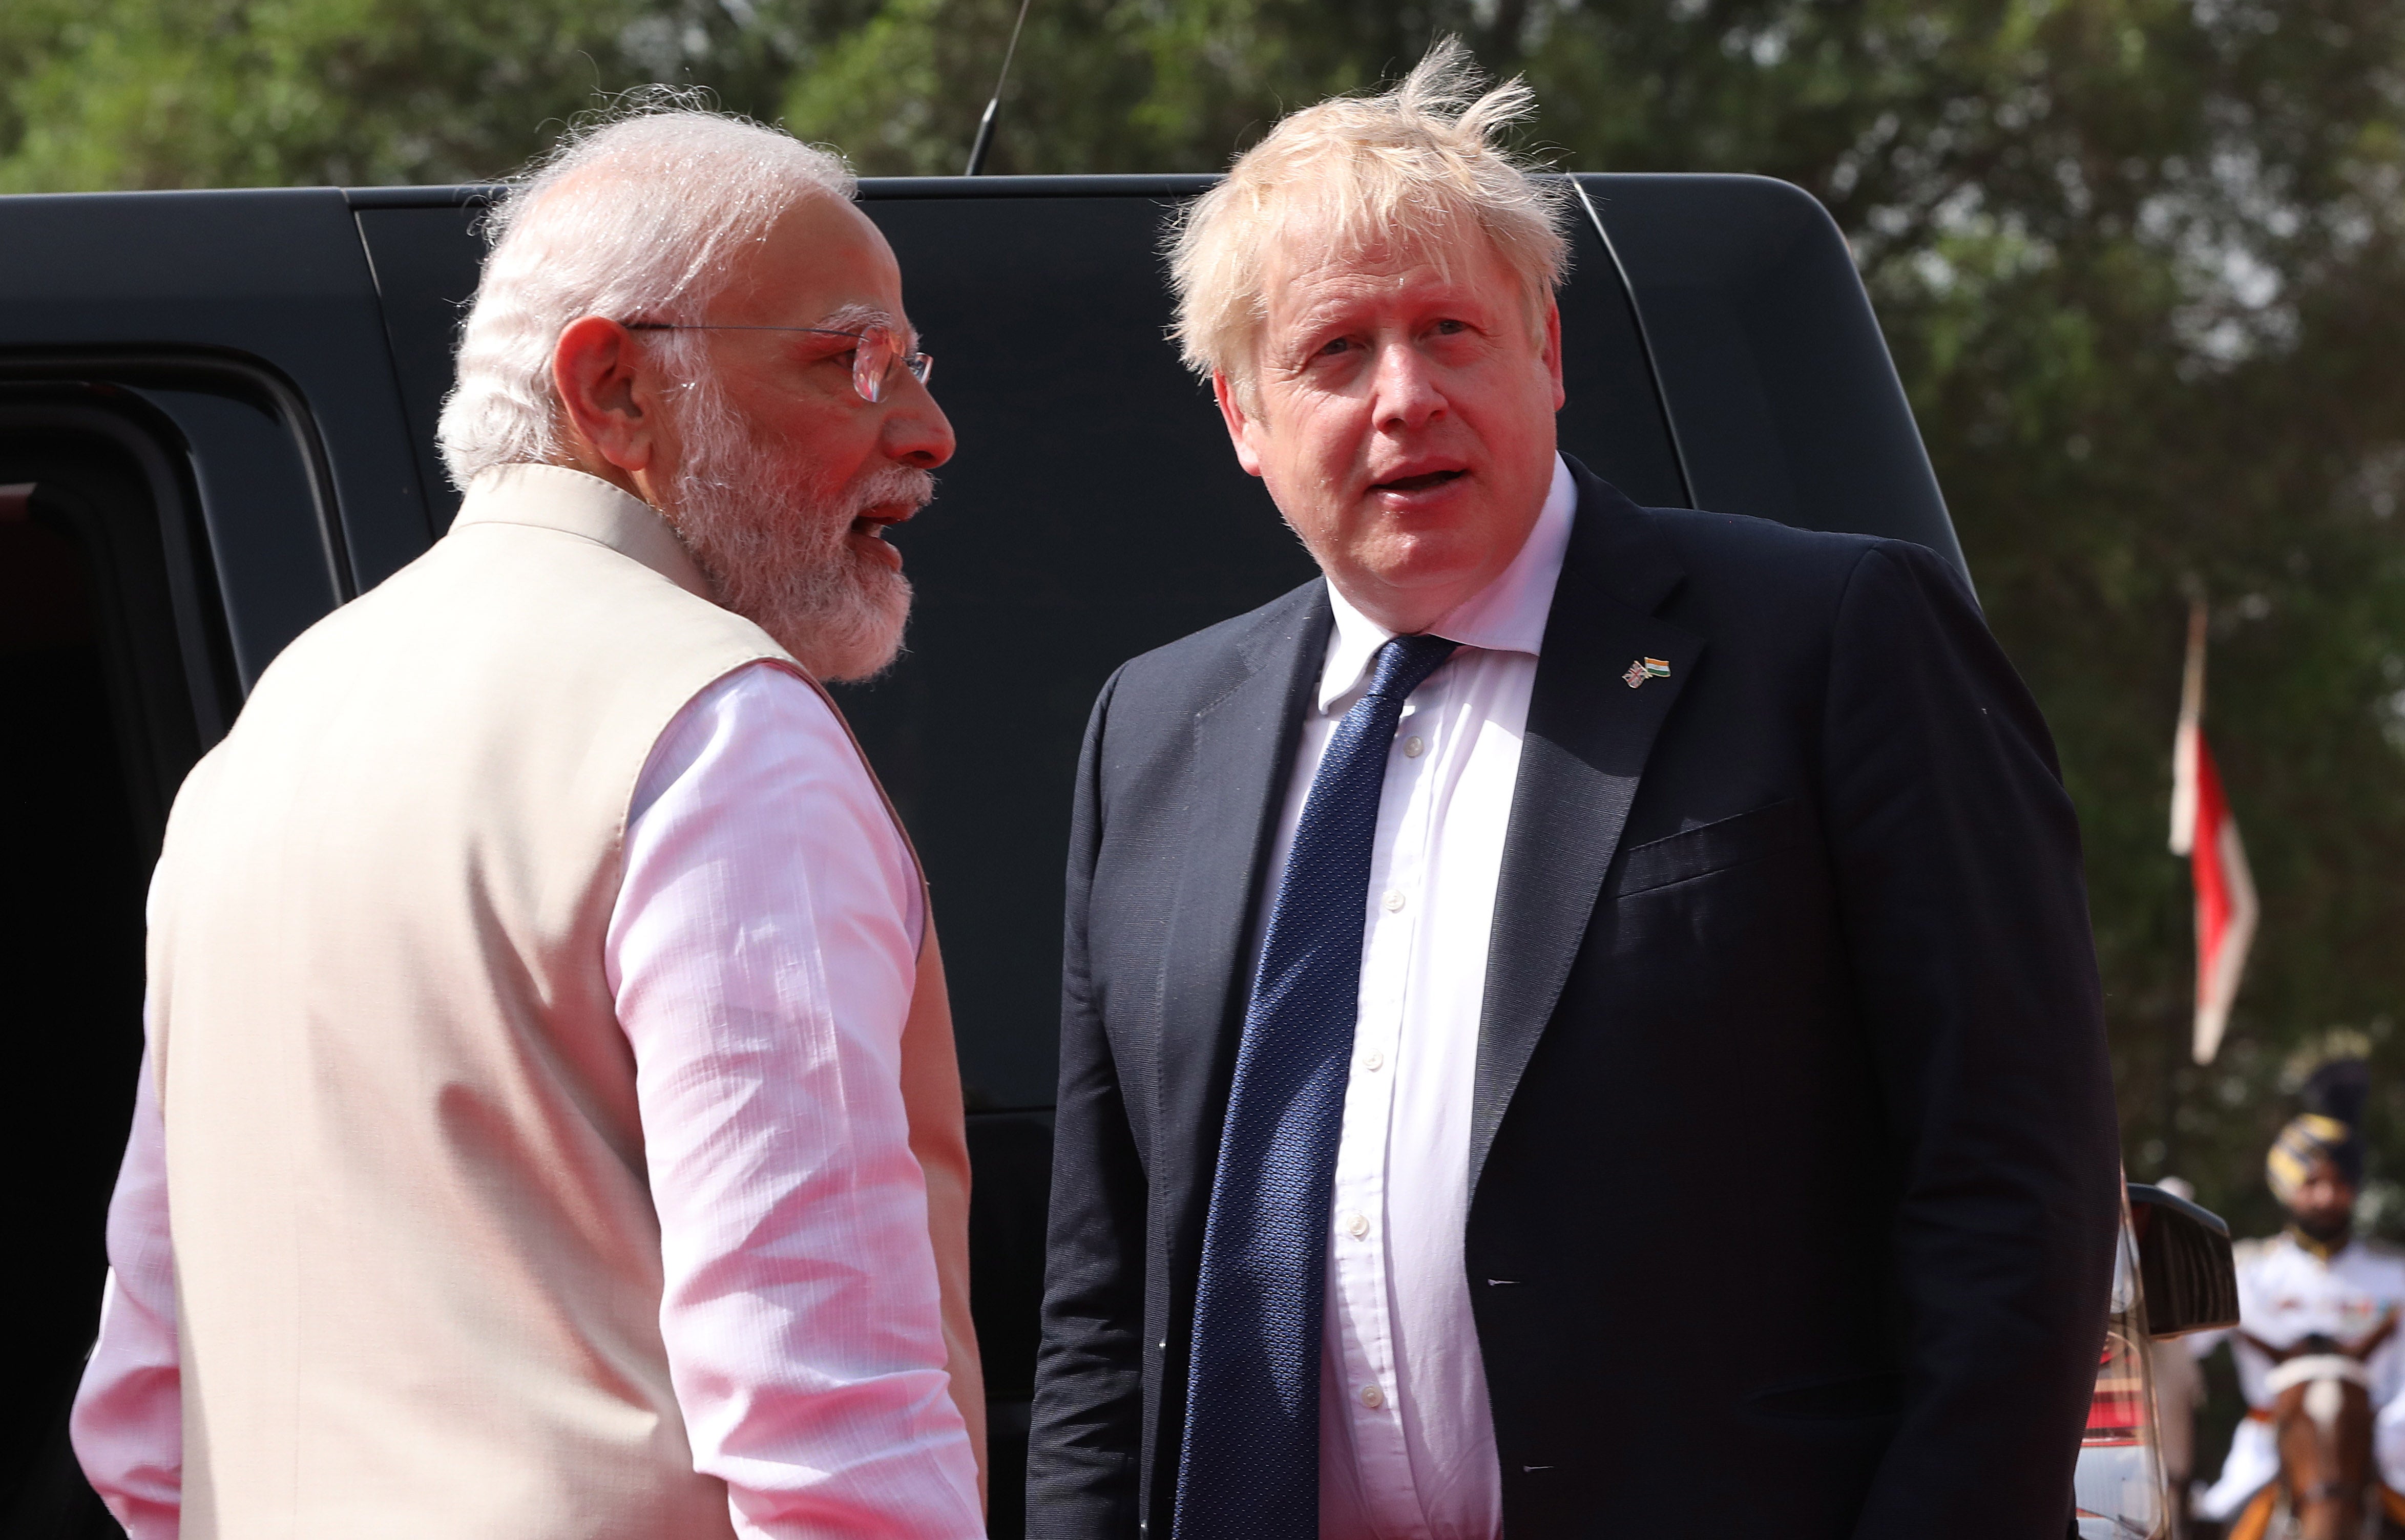 Boris Johnson is in India for defence, energy, and trade talks